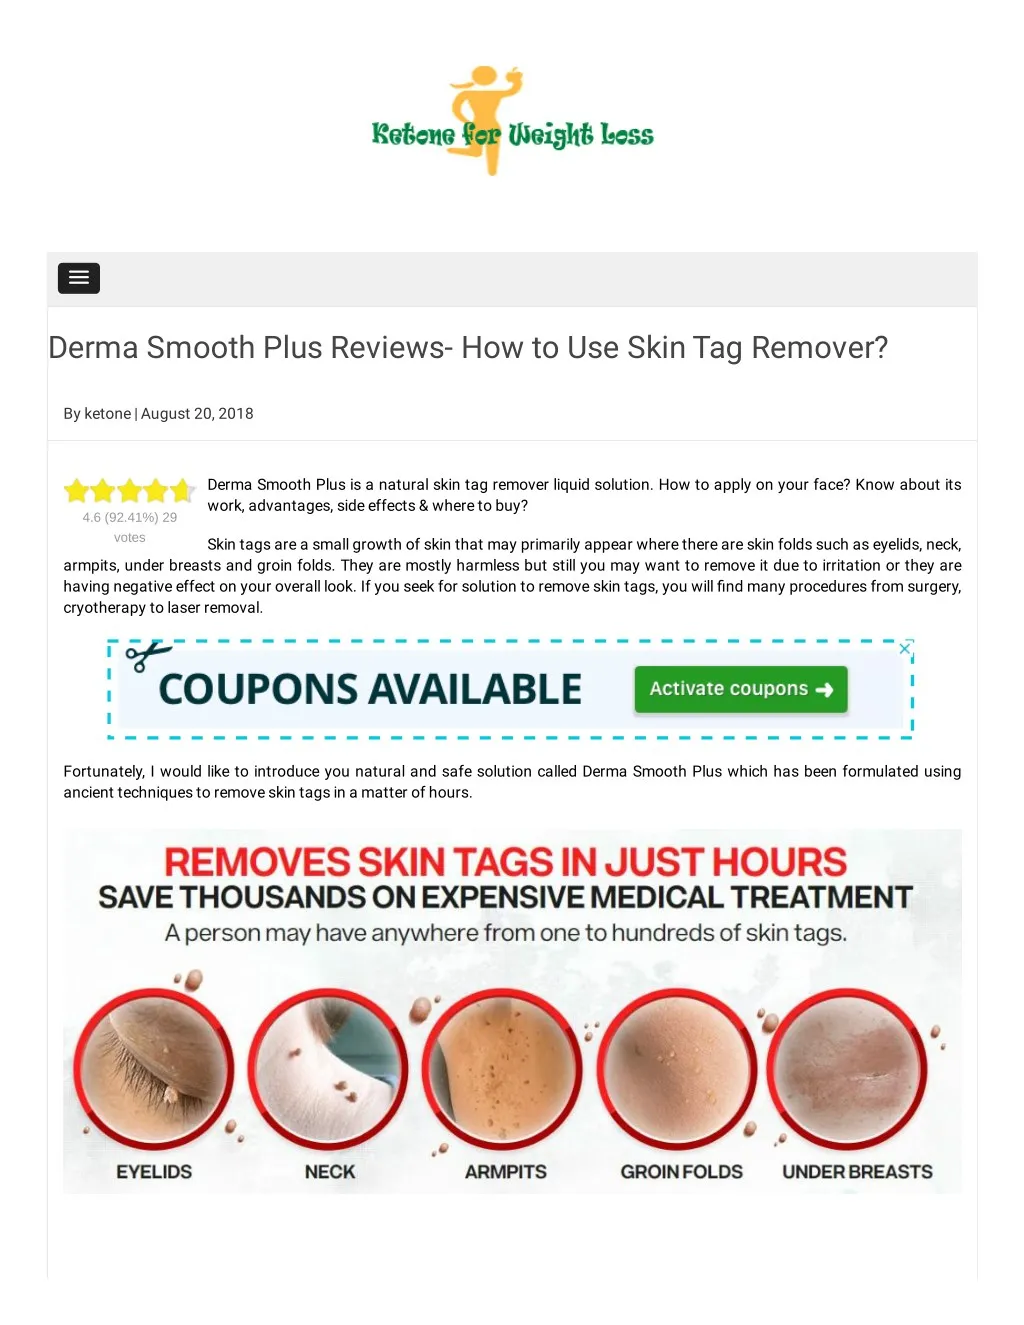 derma smooth plus reviews how to use skin